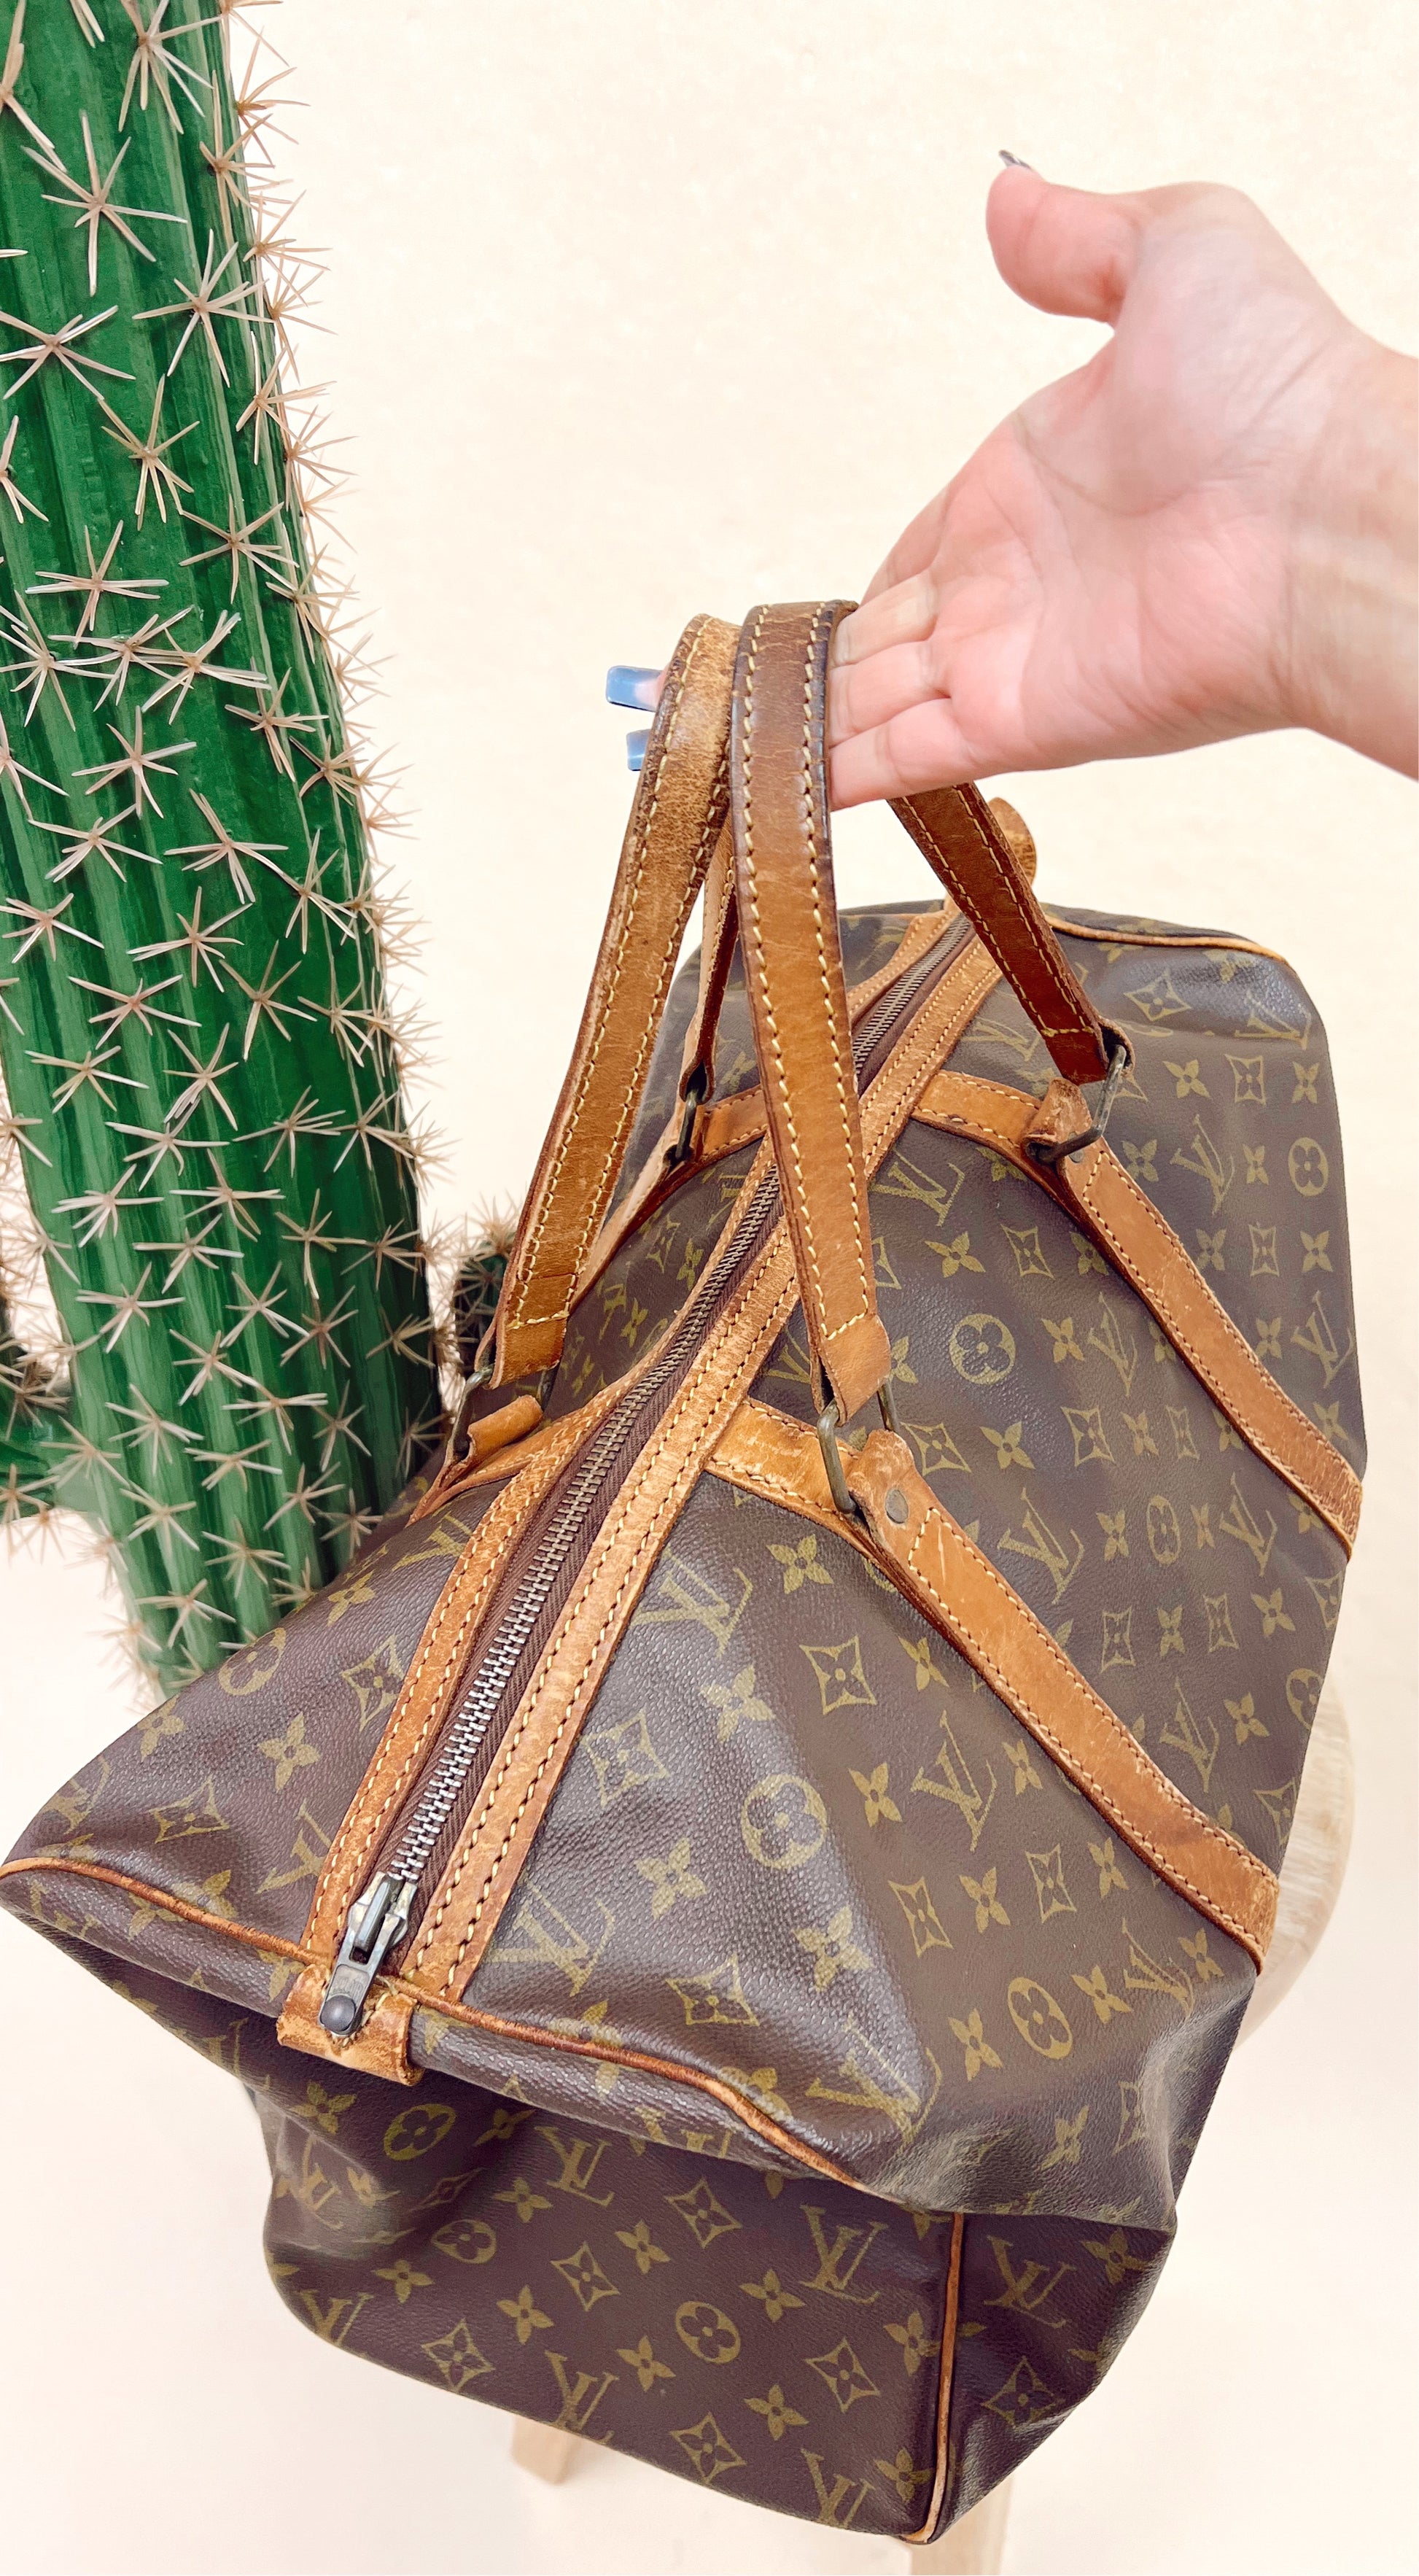 Discontinued Louis Vuitton bags can increase in price by 50% or more w, Louis  Vuitton Bag